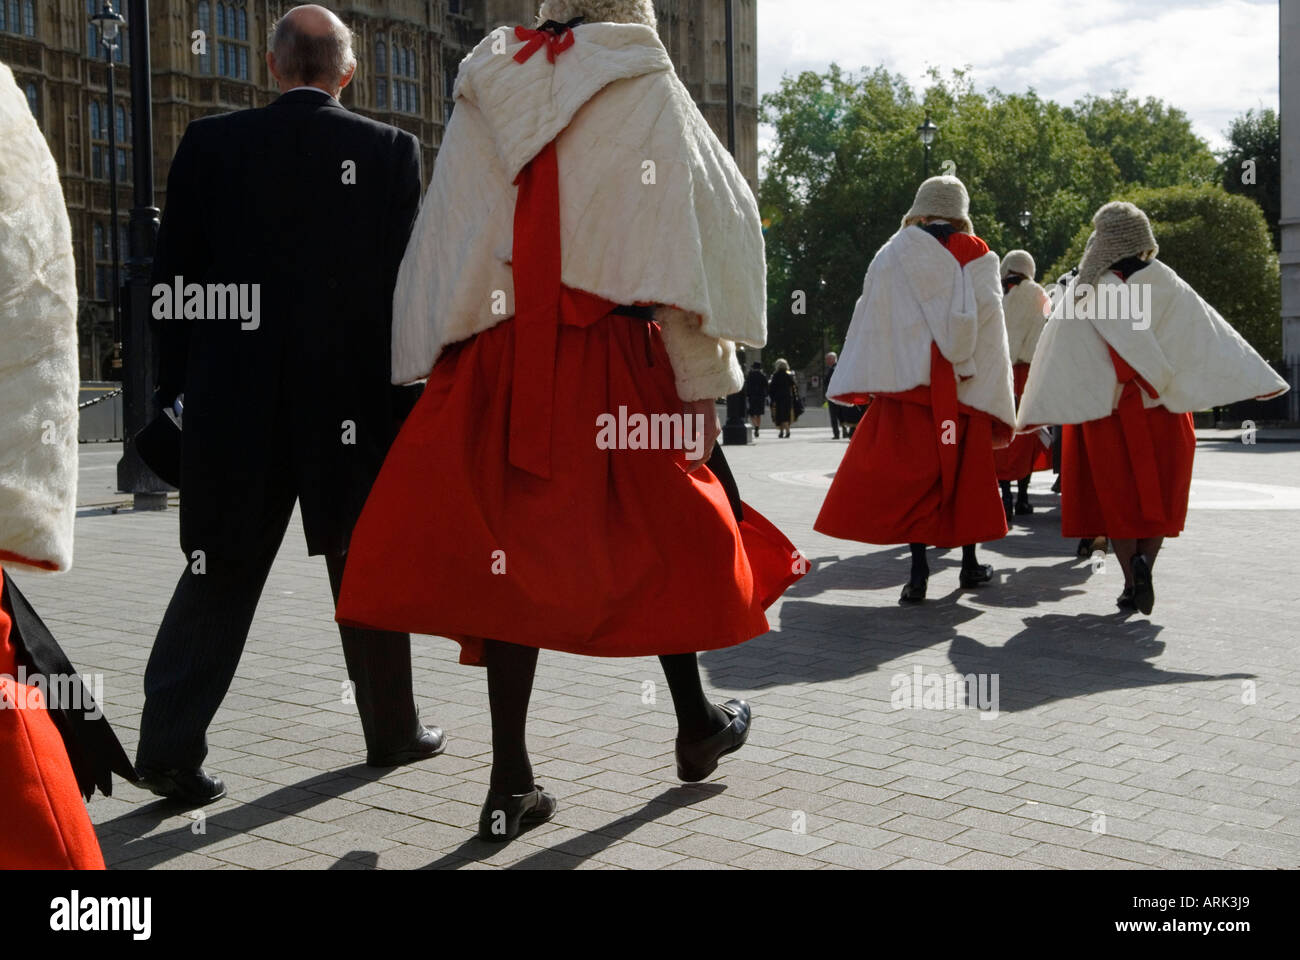 Lord Chancellors Breakfast. High Court Judges walk from Westminster Abbey to House of Lords. Ermine robes pomp and ceremony. London England Uk 2000s Stock Photo